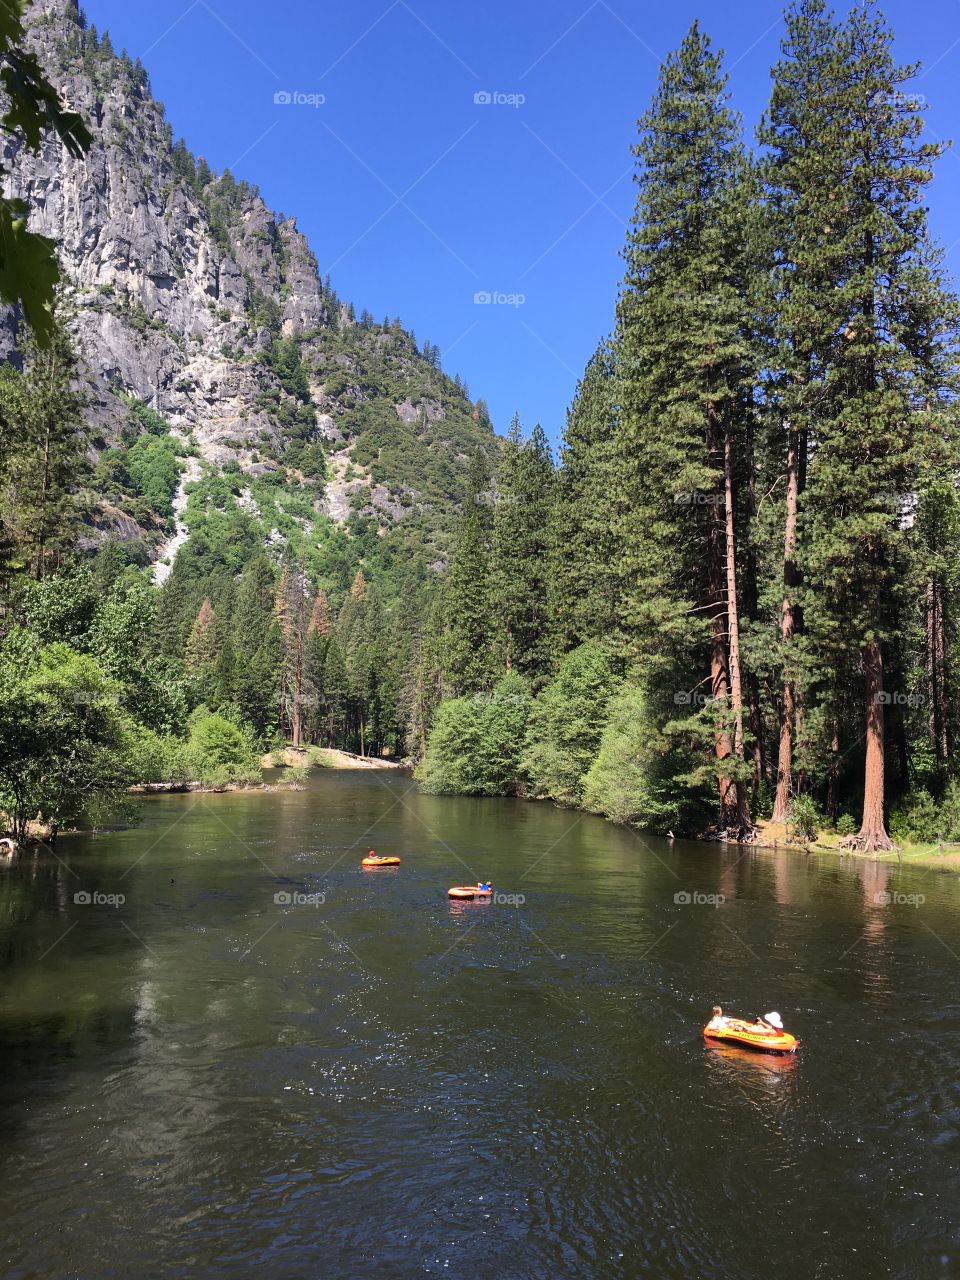 Rafters floating down the merced river at yosemite national park